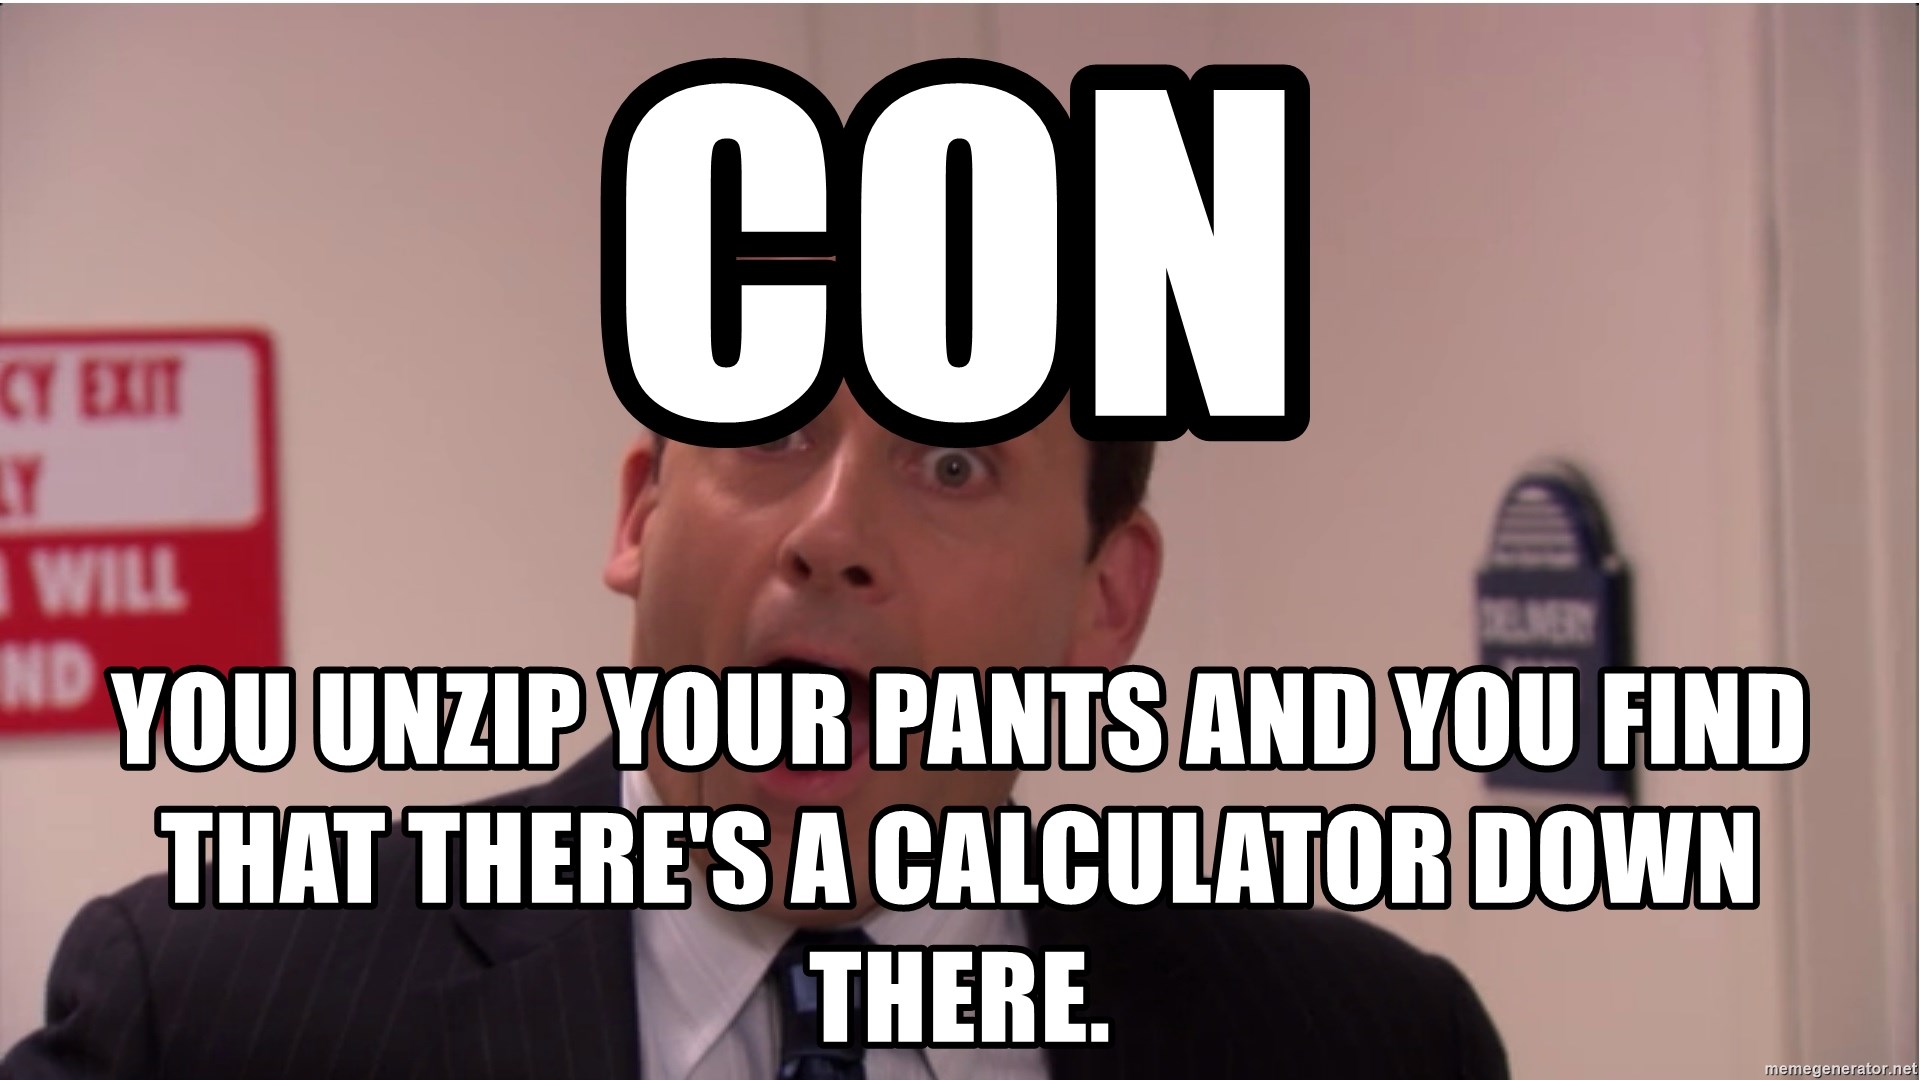 con-you-unzip-your-pants-and-you-find-that-theres-a-calculator-down-there.jpg